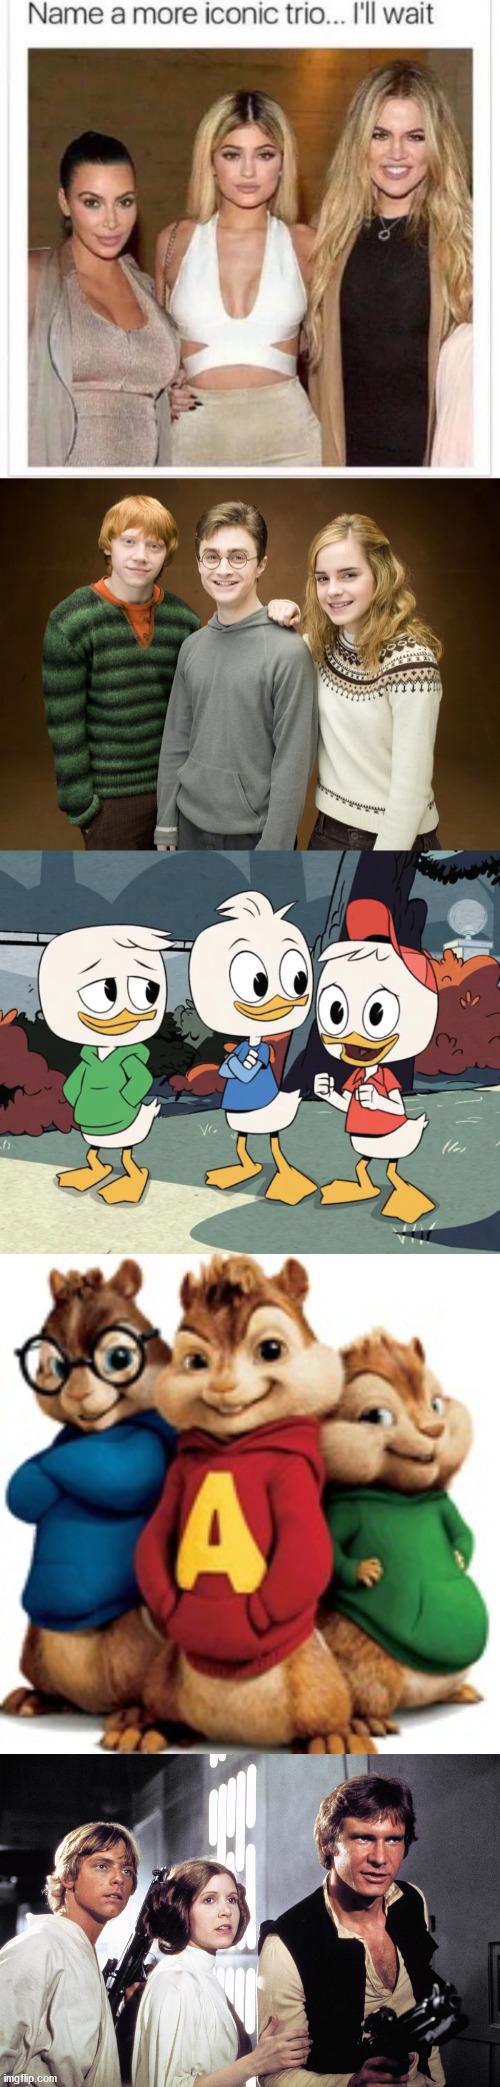 I've got 4. | image tagged in name a more iconic trio,harry potter,alvin and the chipmunks,ducktales,huey dewey and louie,star wars | made w/ Imgflip meme maker